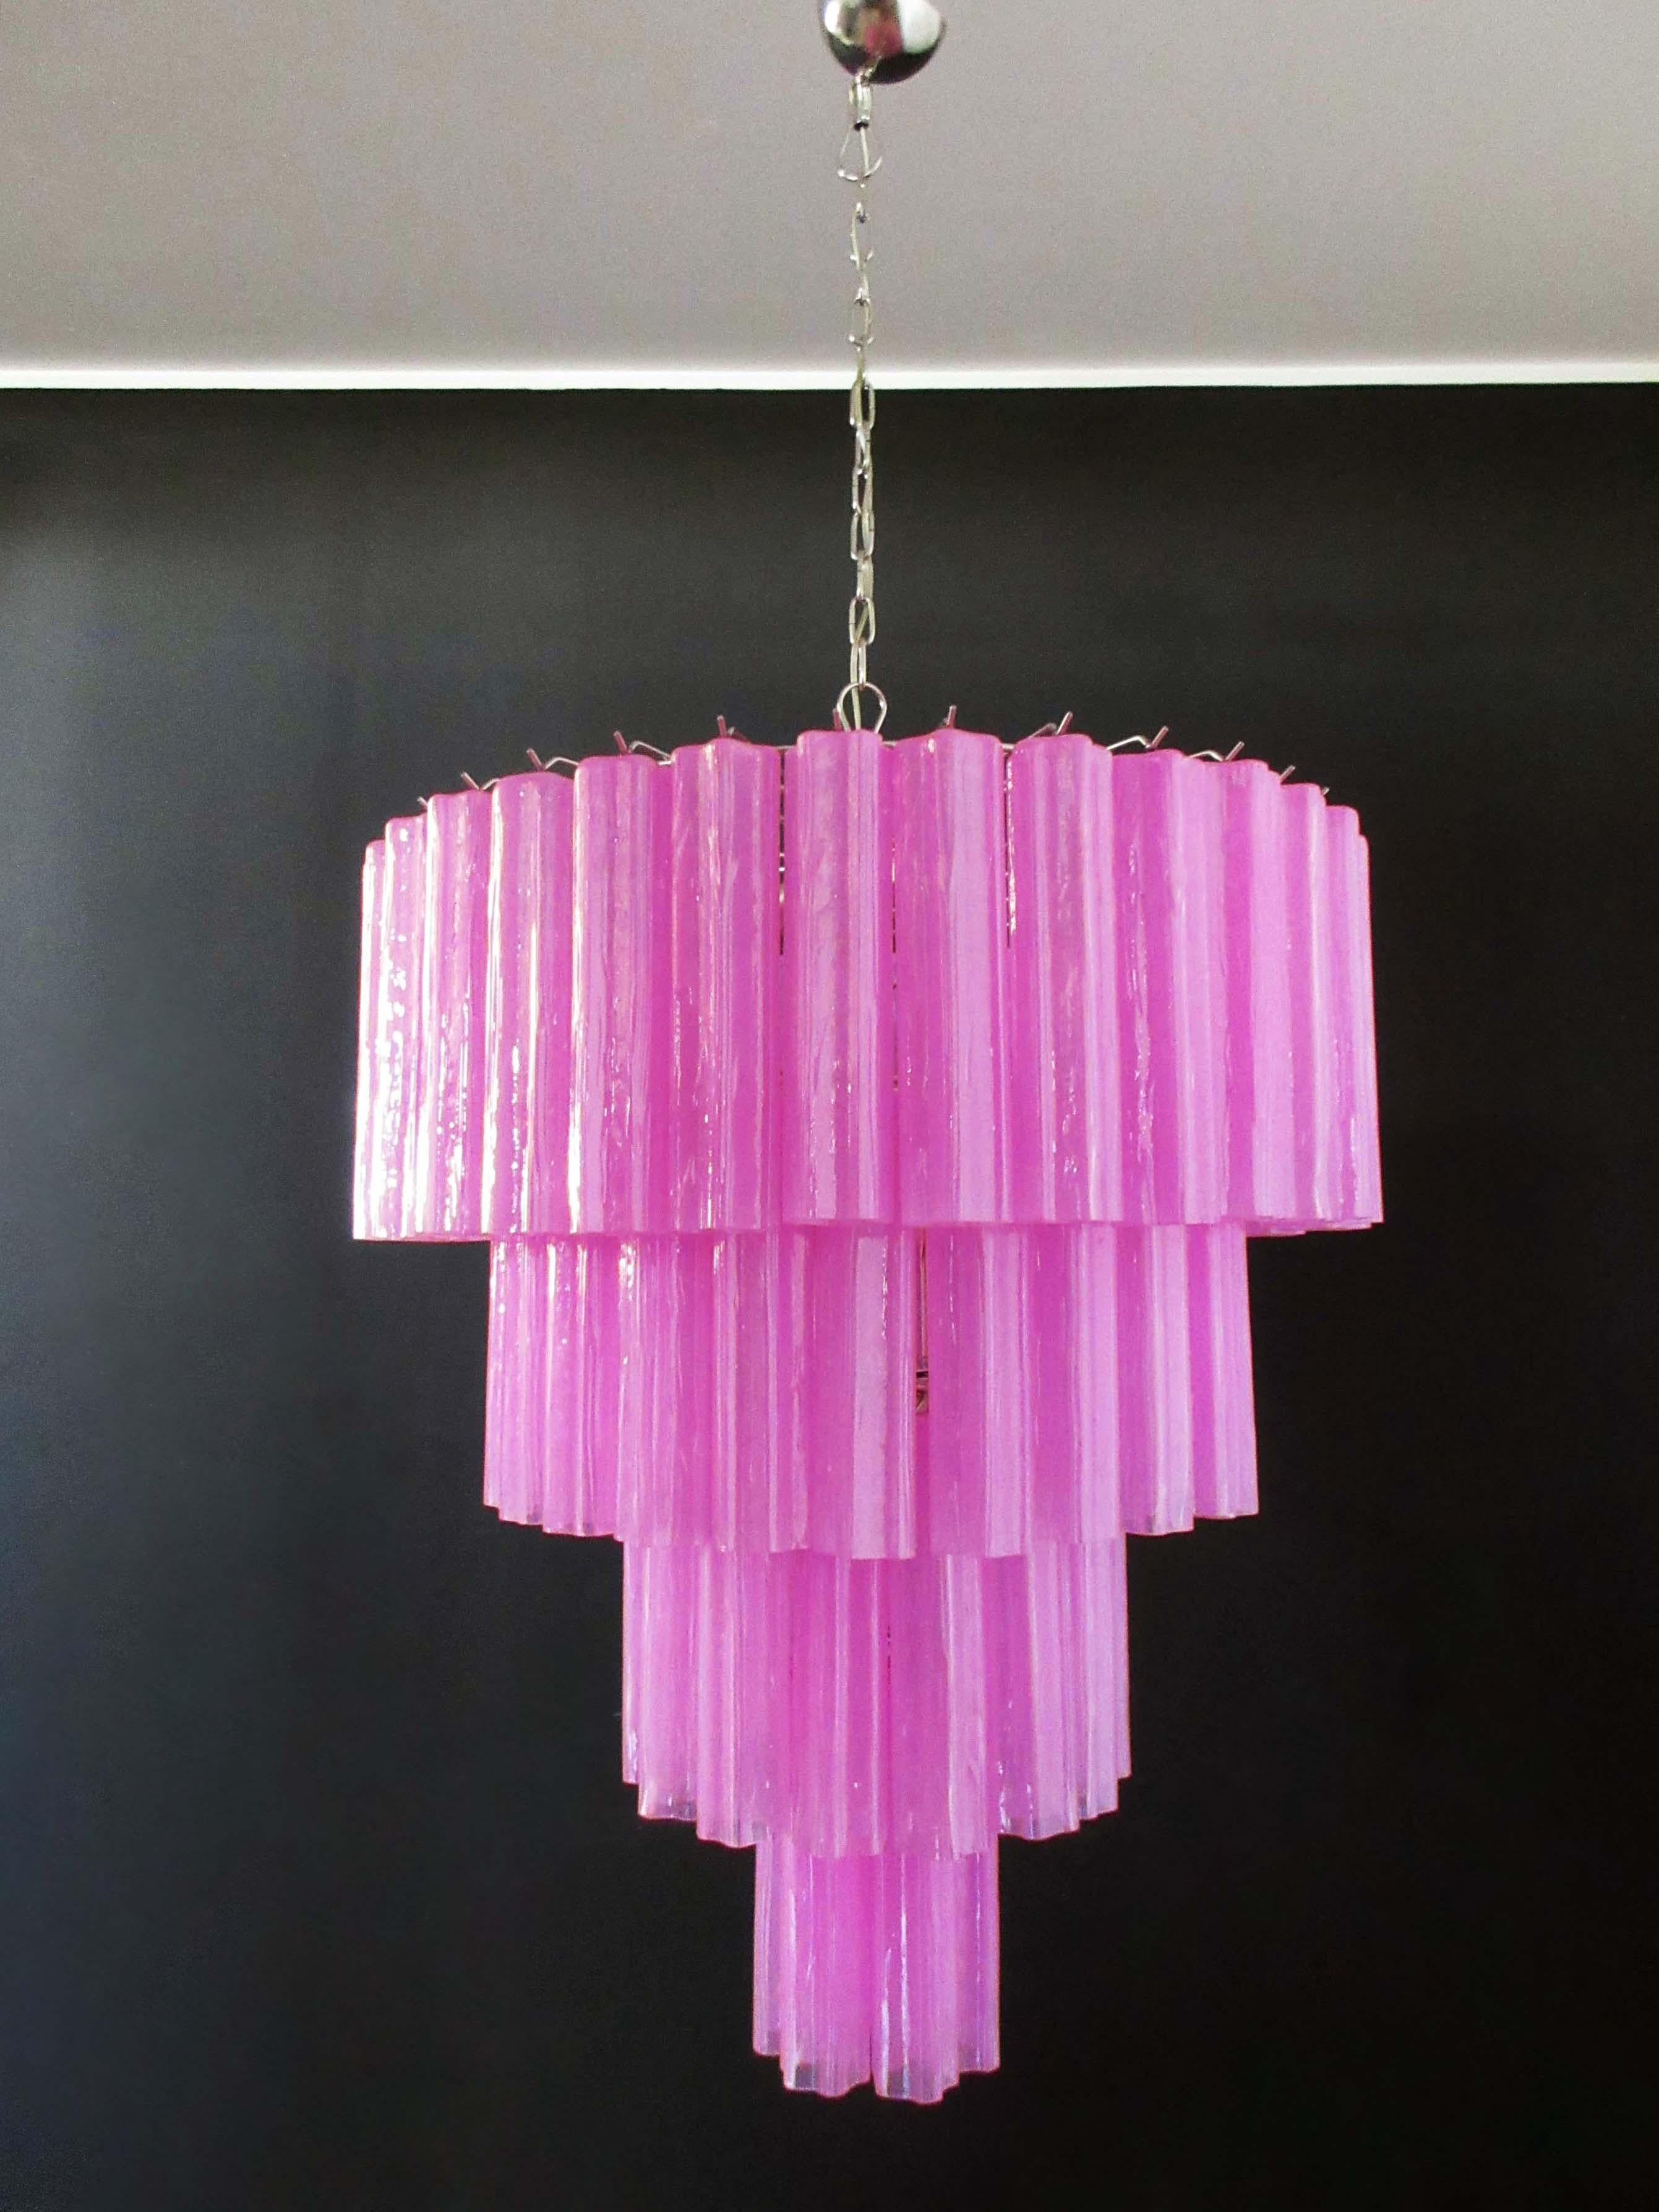 Italian vintage chandelier in Murano glass and nickel plated metal structure on 4 levels. The armor polished nickel supports 78 large pink fuxia silk glass tubes in a star shape.
Period: Late XX century
Dimensions: 70,90 inches (180 cm) height